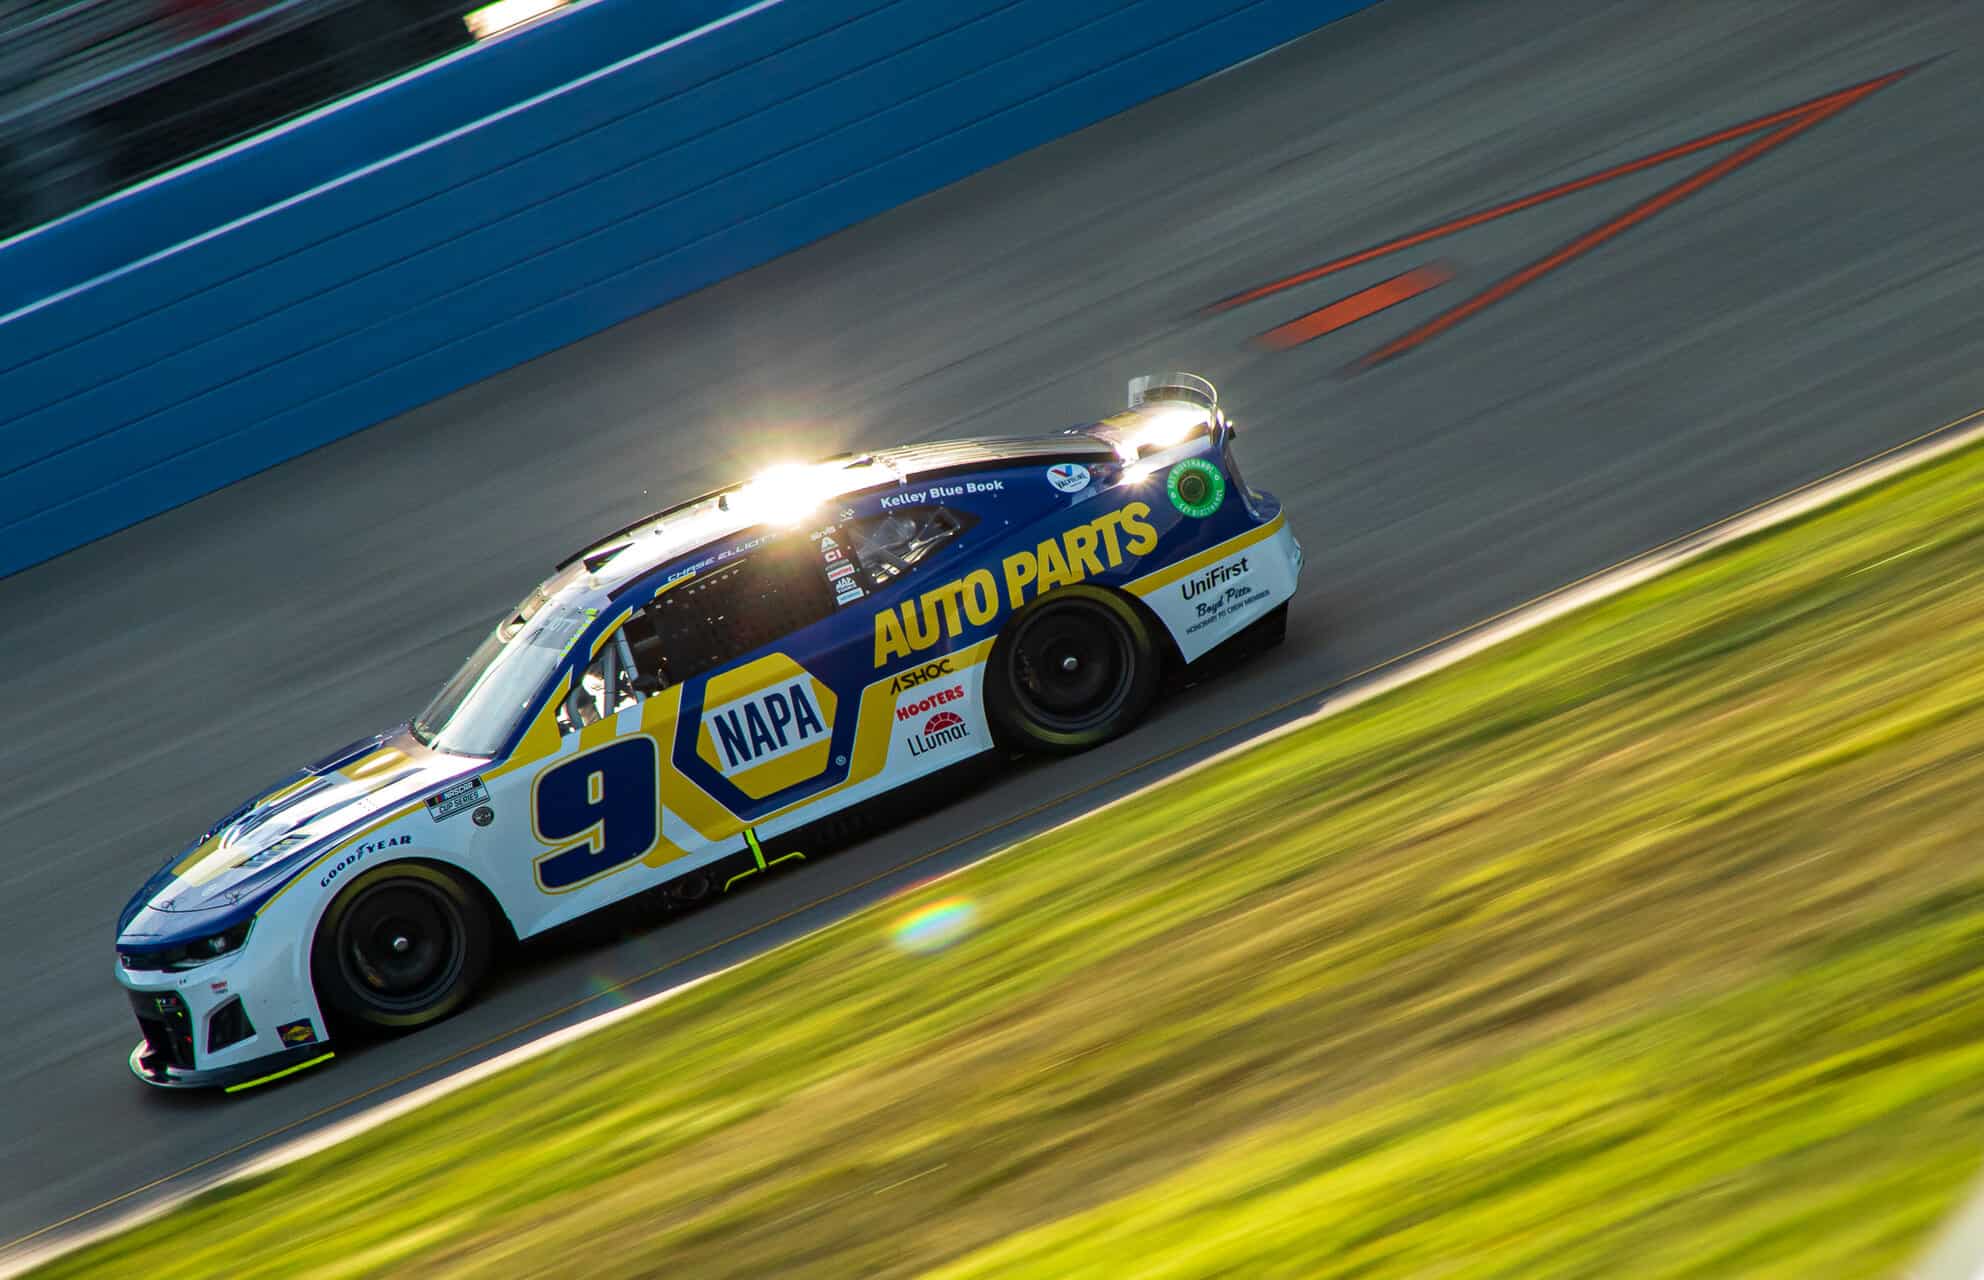 Chase Elliott is the Kickin' the Tires Bettin' to win favorite this week at Nashville Superspeedway. Photo by Christian Koelle/Kickin' the Tires